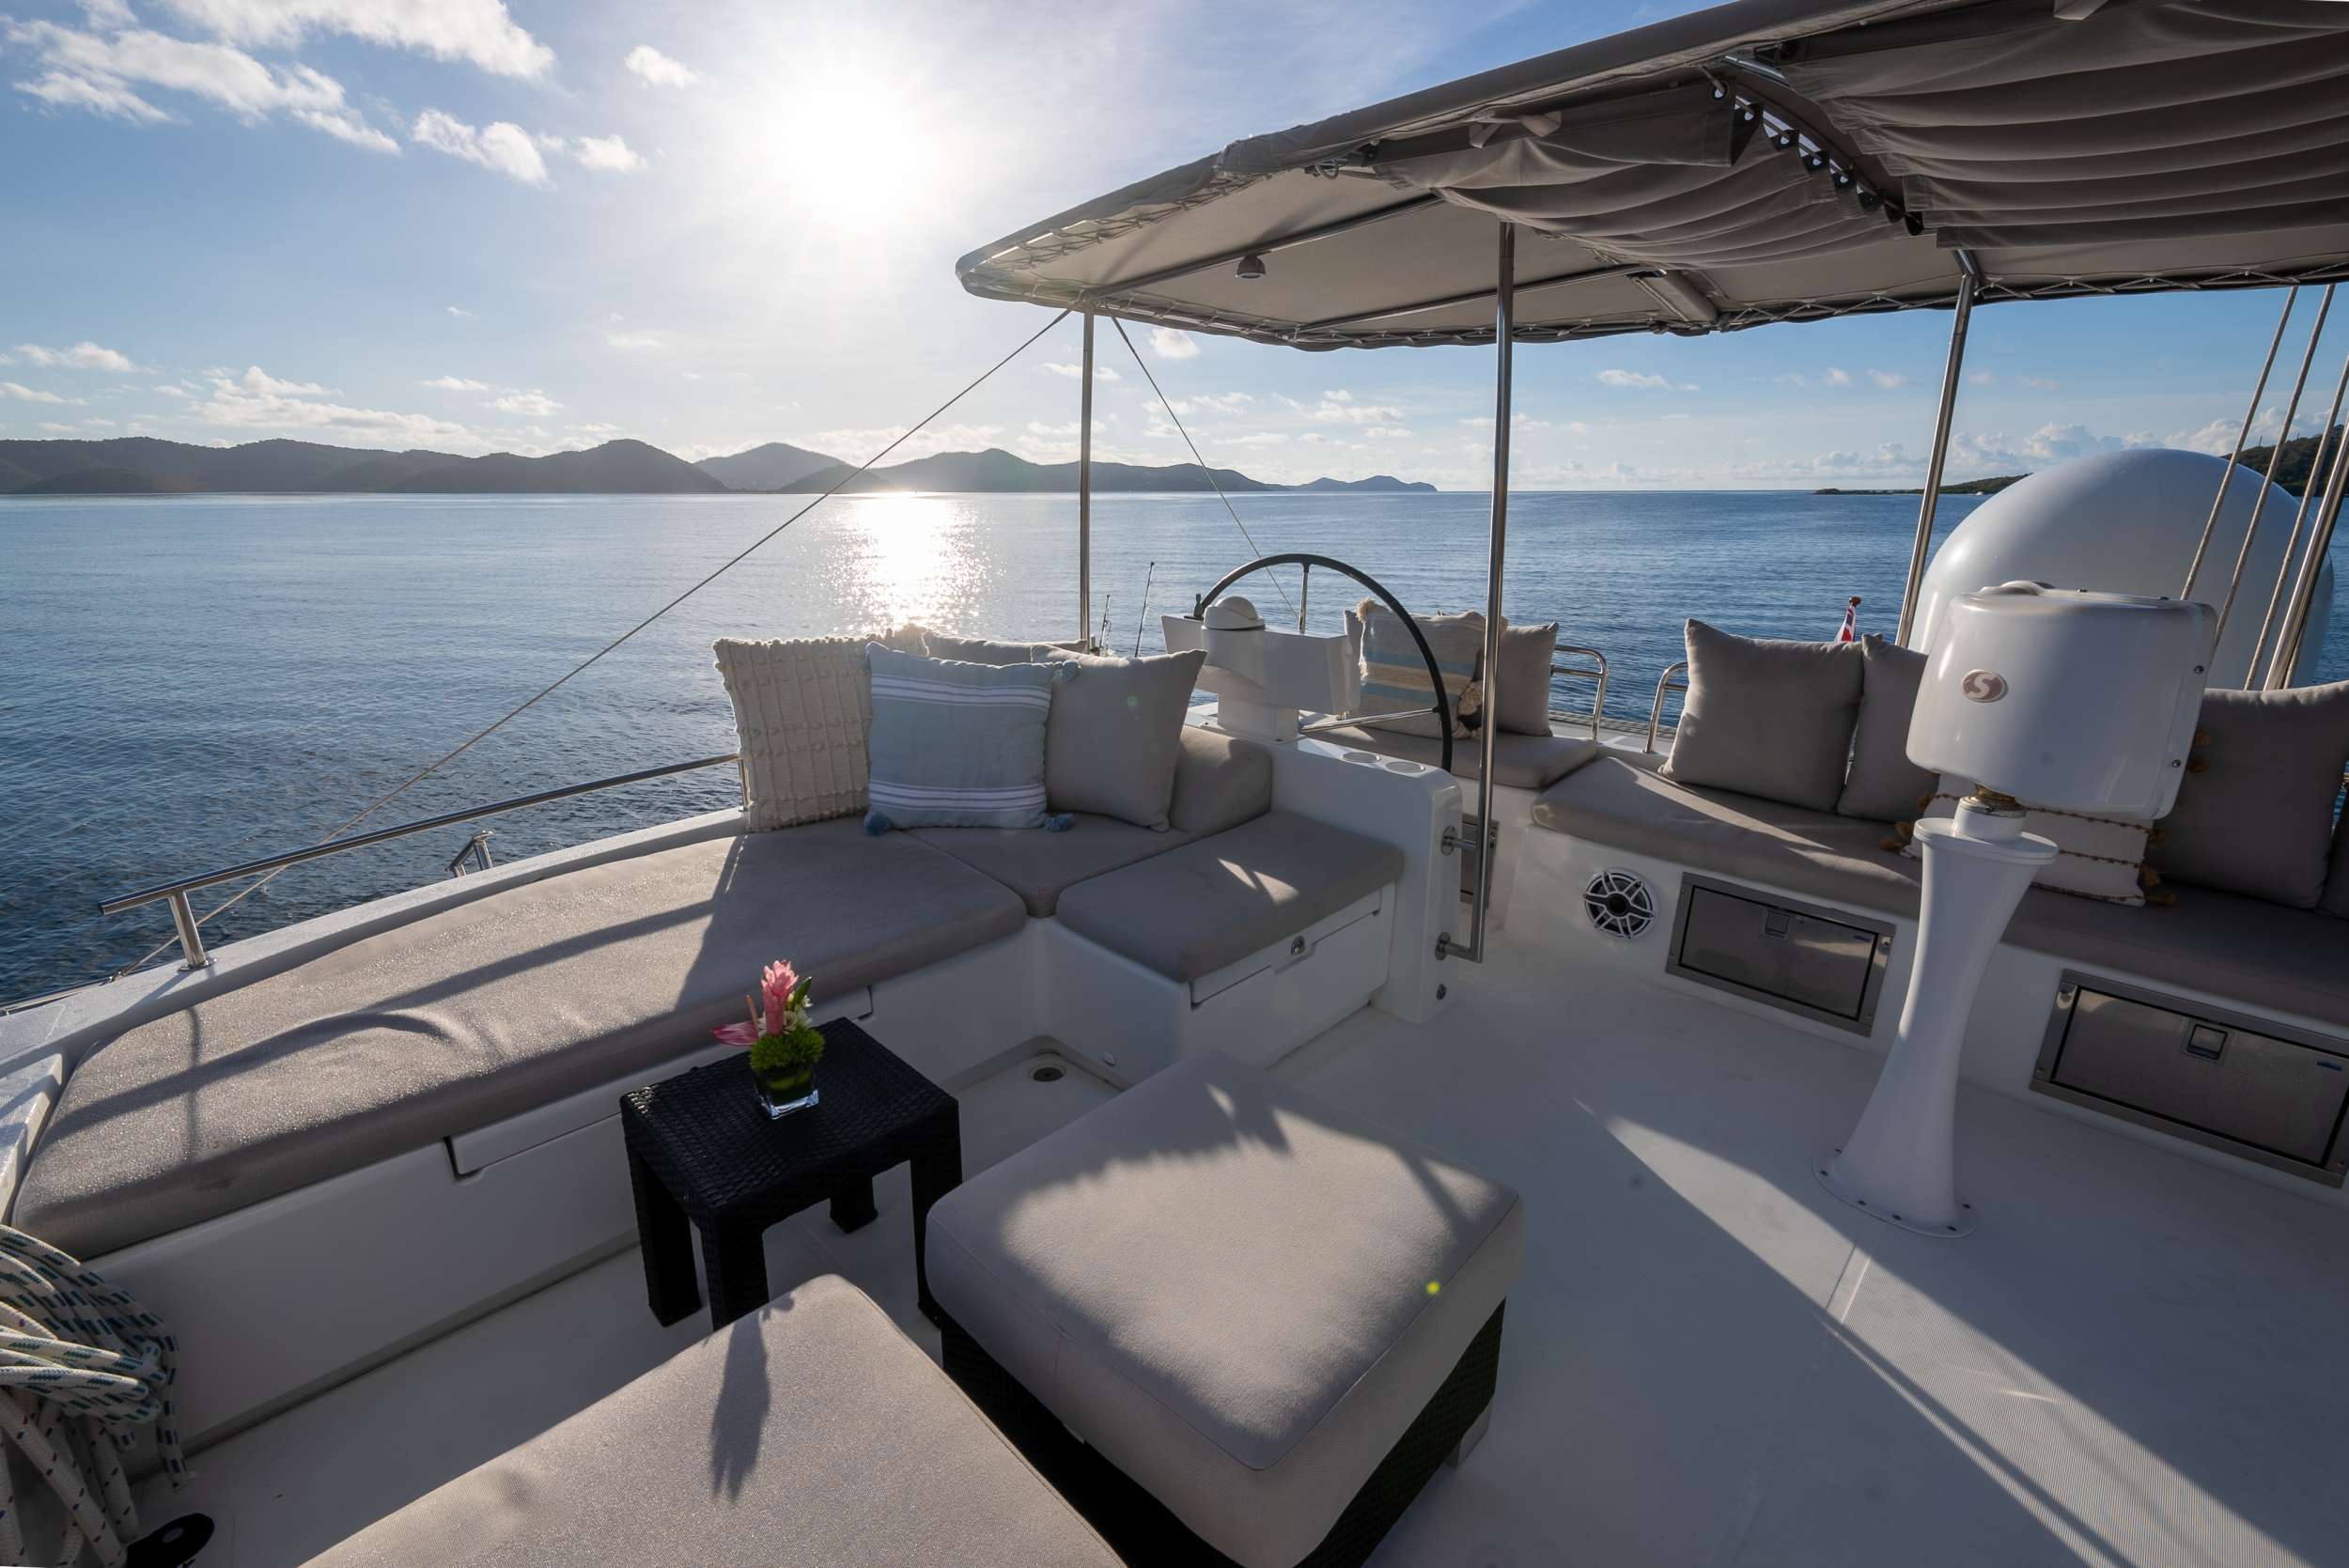 Sip Sip Yacht Charter - Large flybridge with plenty of seating and 360 degree views